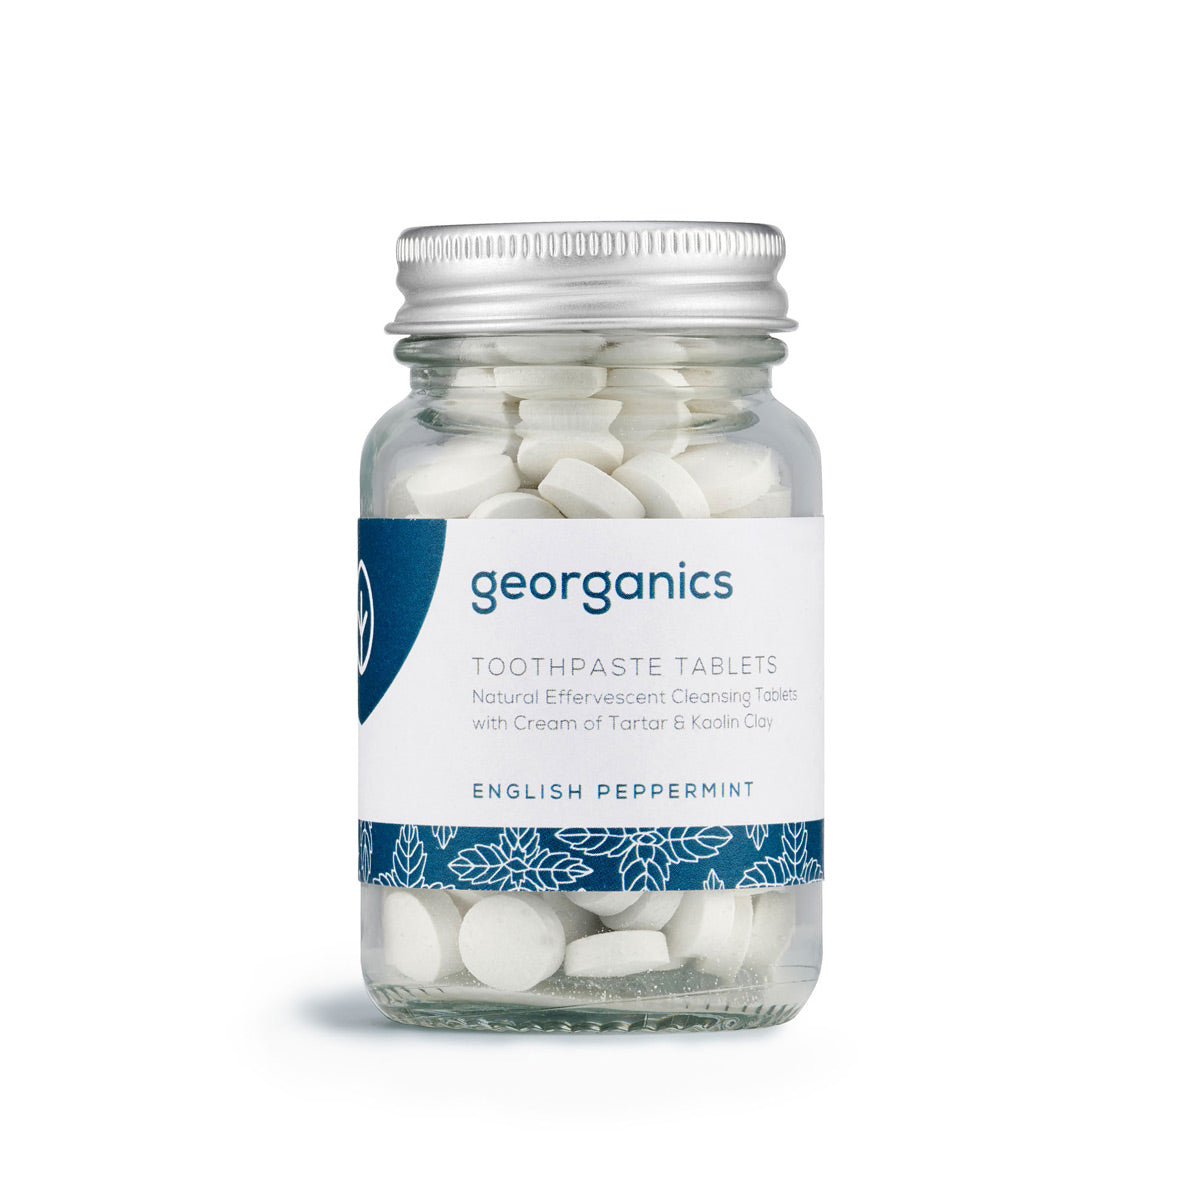 Georganics Toothpaste Tablets English Peppermint